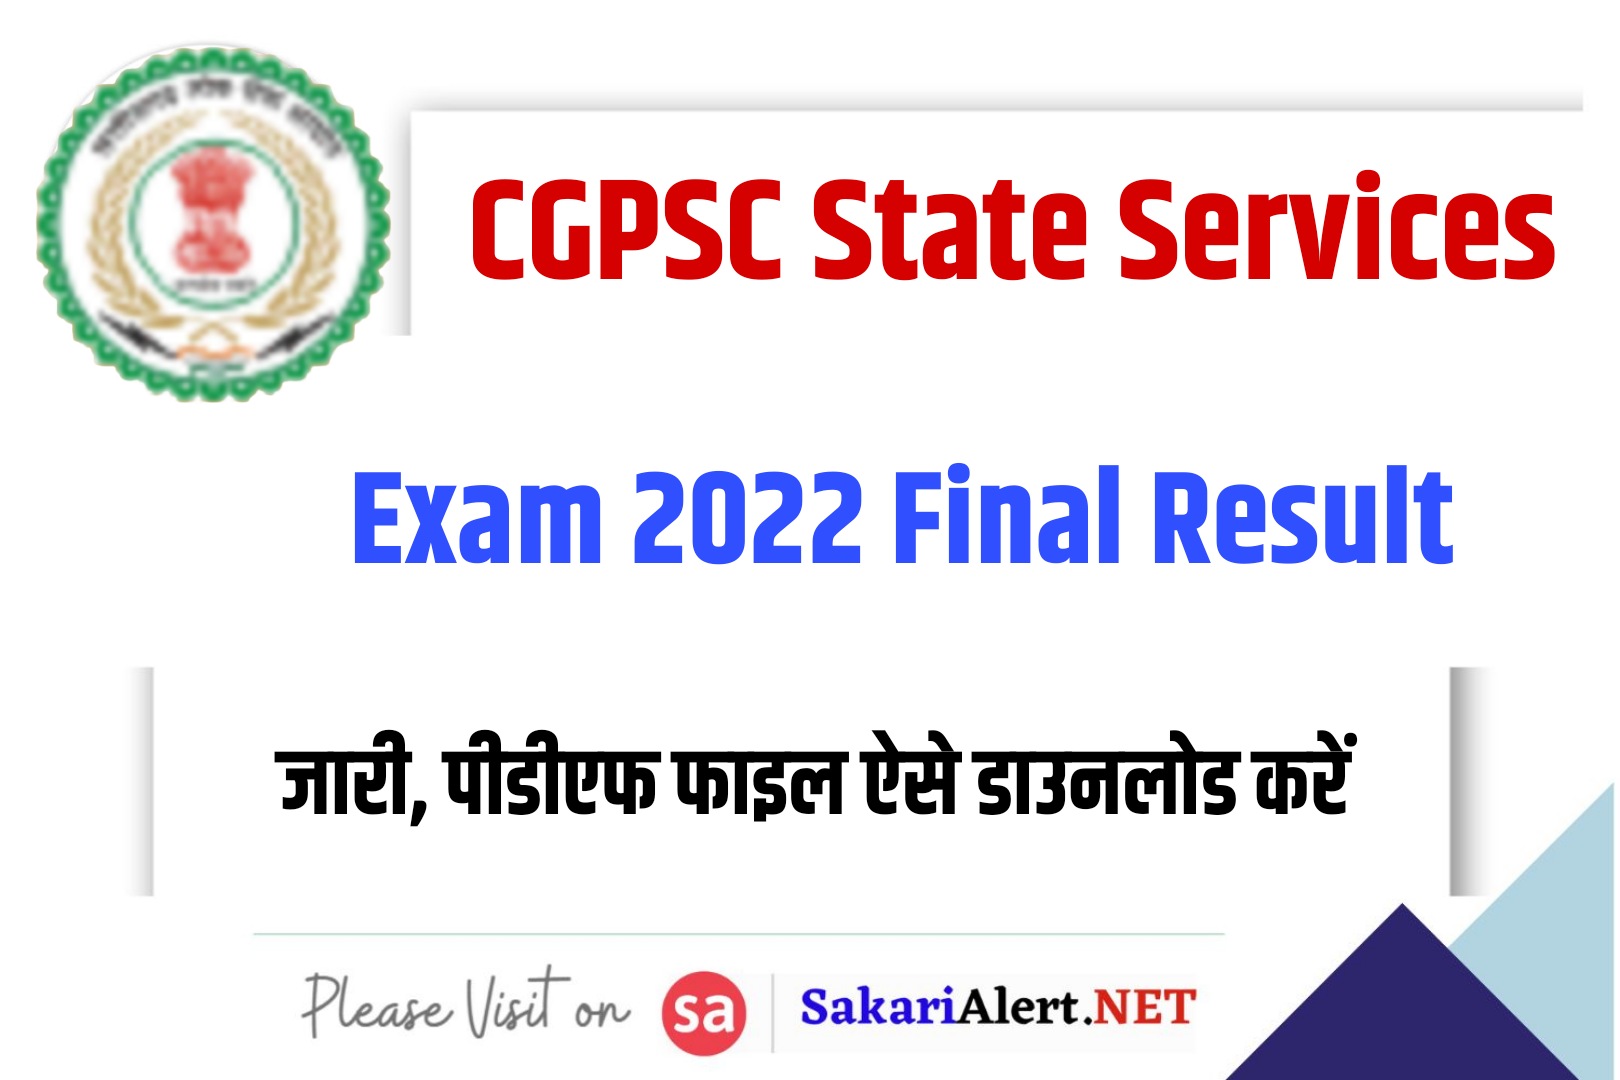 CGPSC State Services Exam 2022 Final Result